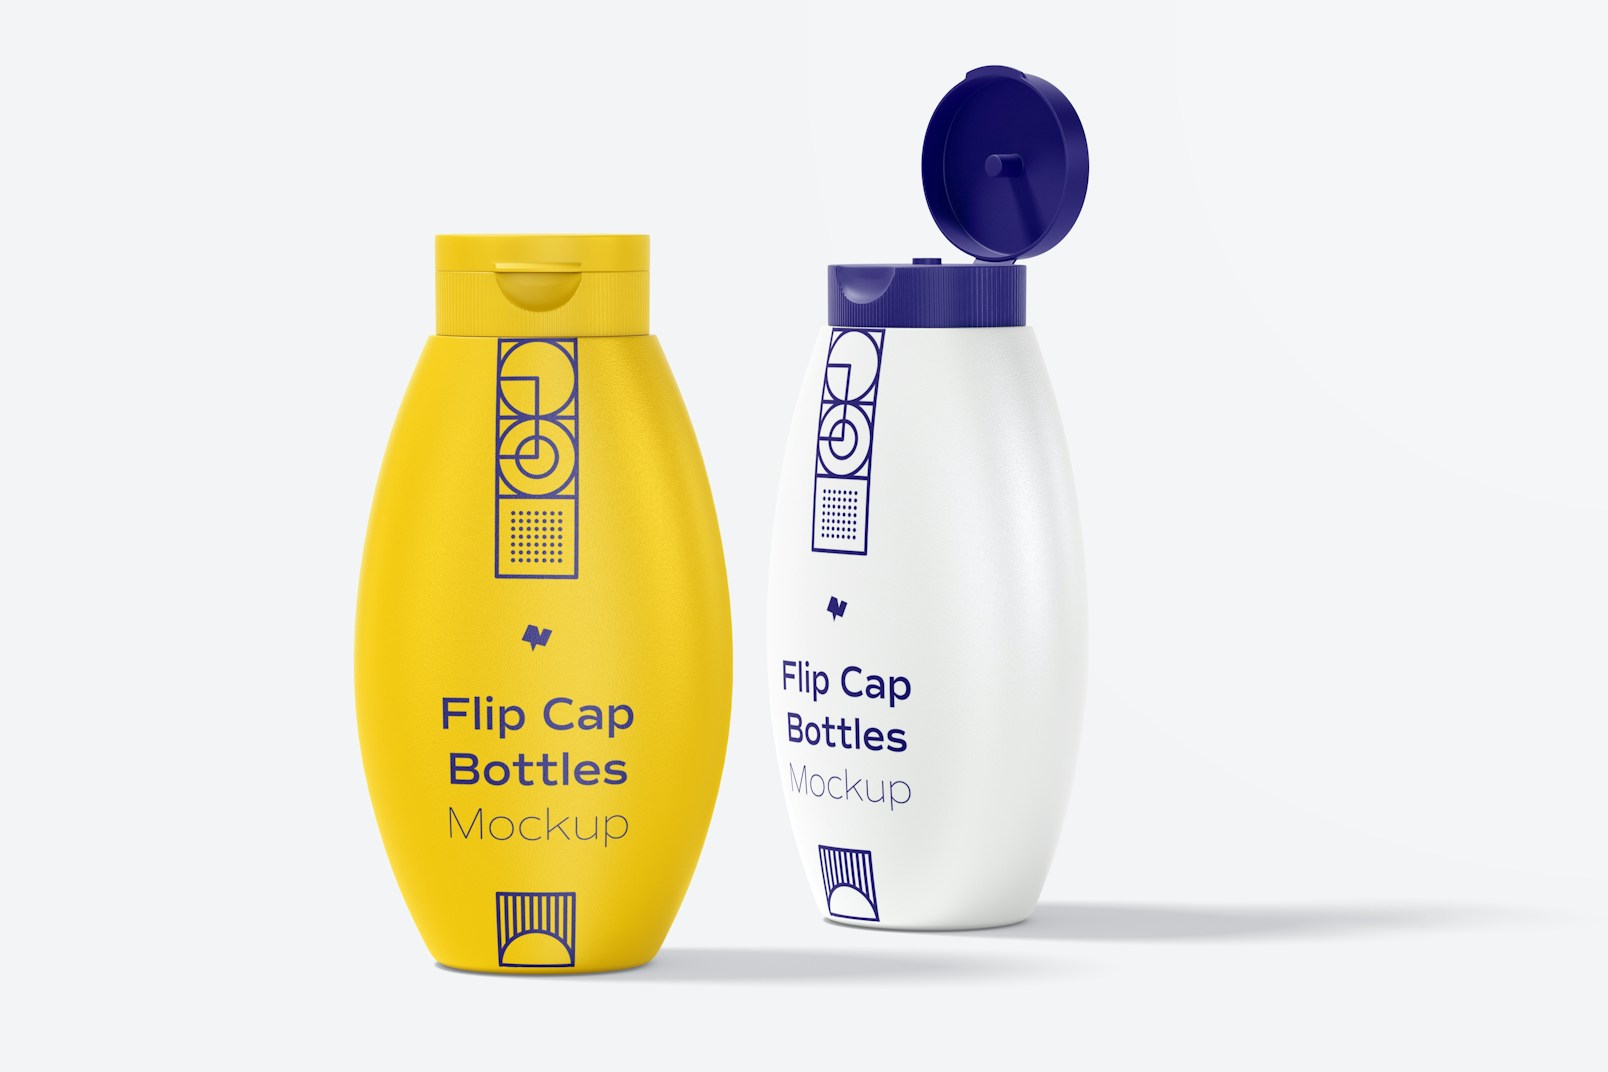 Flip Cap Bottles Mockup, Opened and Closed